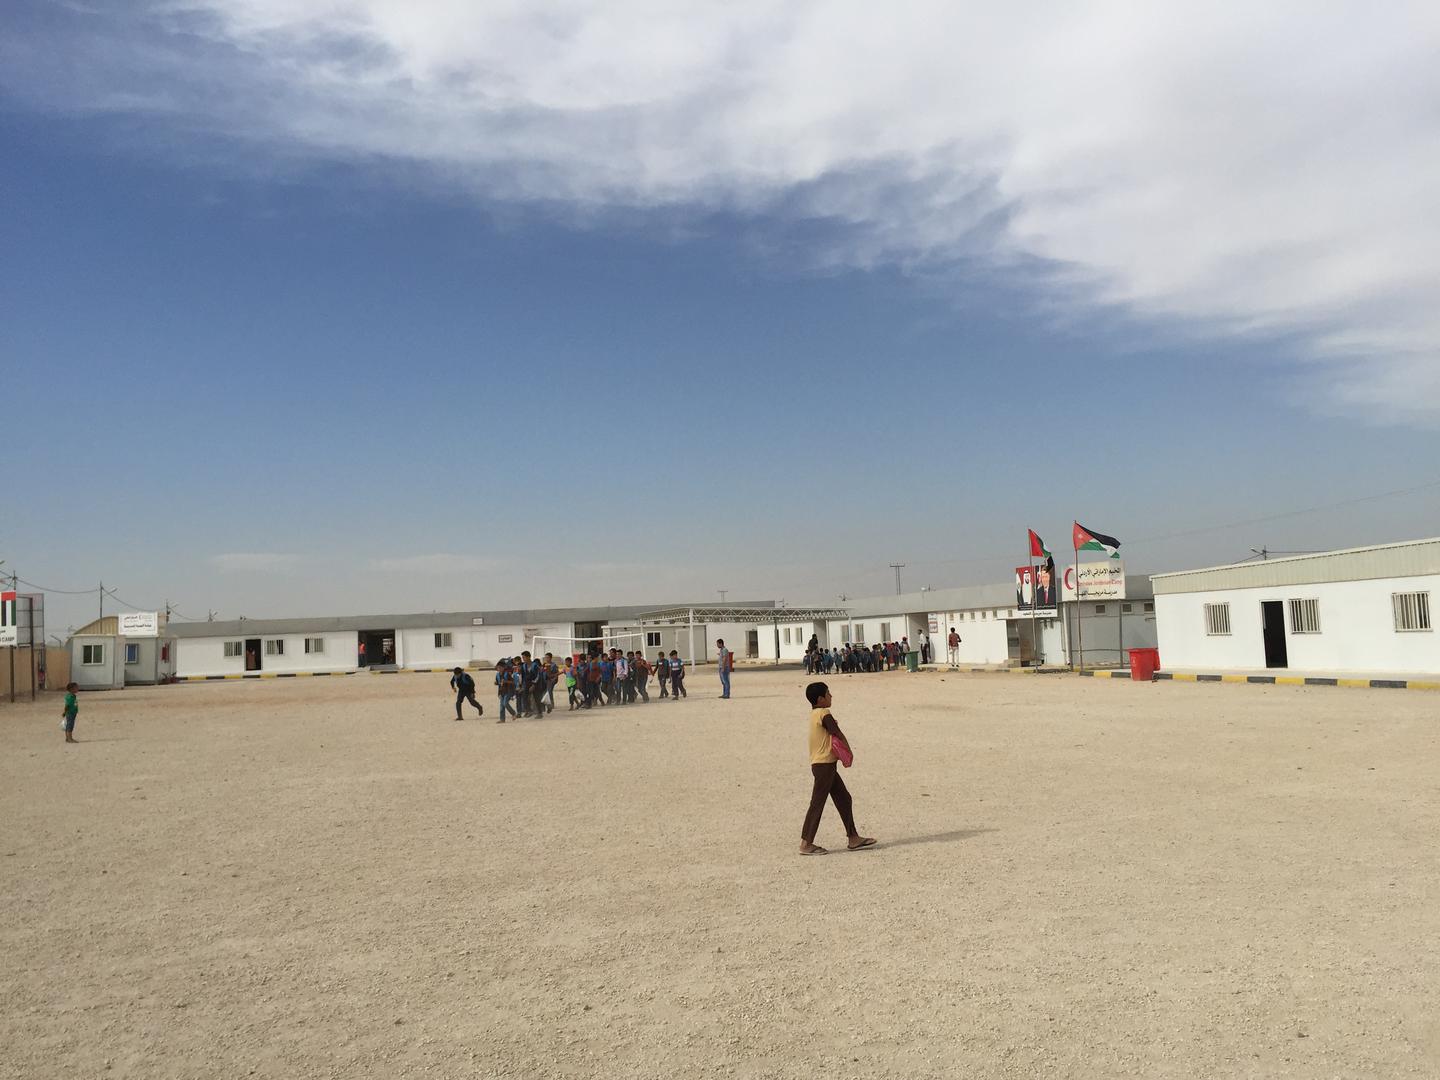 Syrian children leave school in the Emirati Jordanian refugee camp, in northern Jordan, October 21, 2015. Jordan’s Education Ministry staffs schools in refugee camps with teachers and administrators.